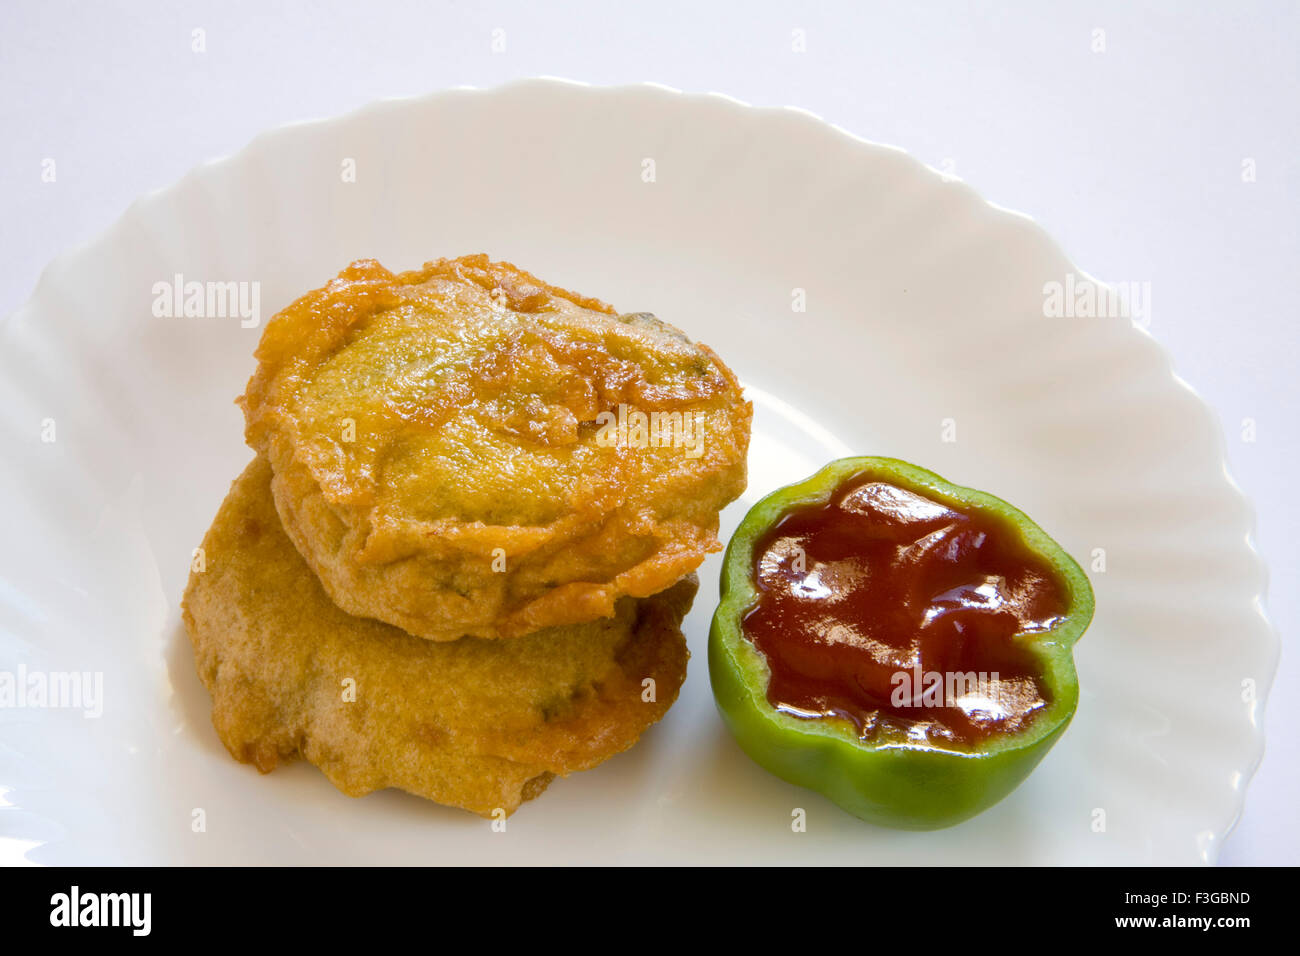 Indian fast food fried batata potatoes vada chopped green chilli served with chutneys tomato ketchup served plate Stock Photo